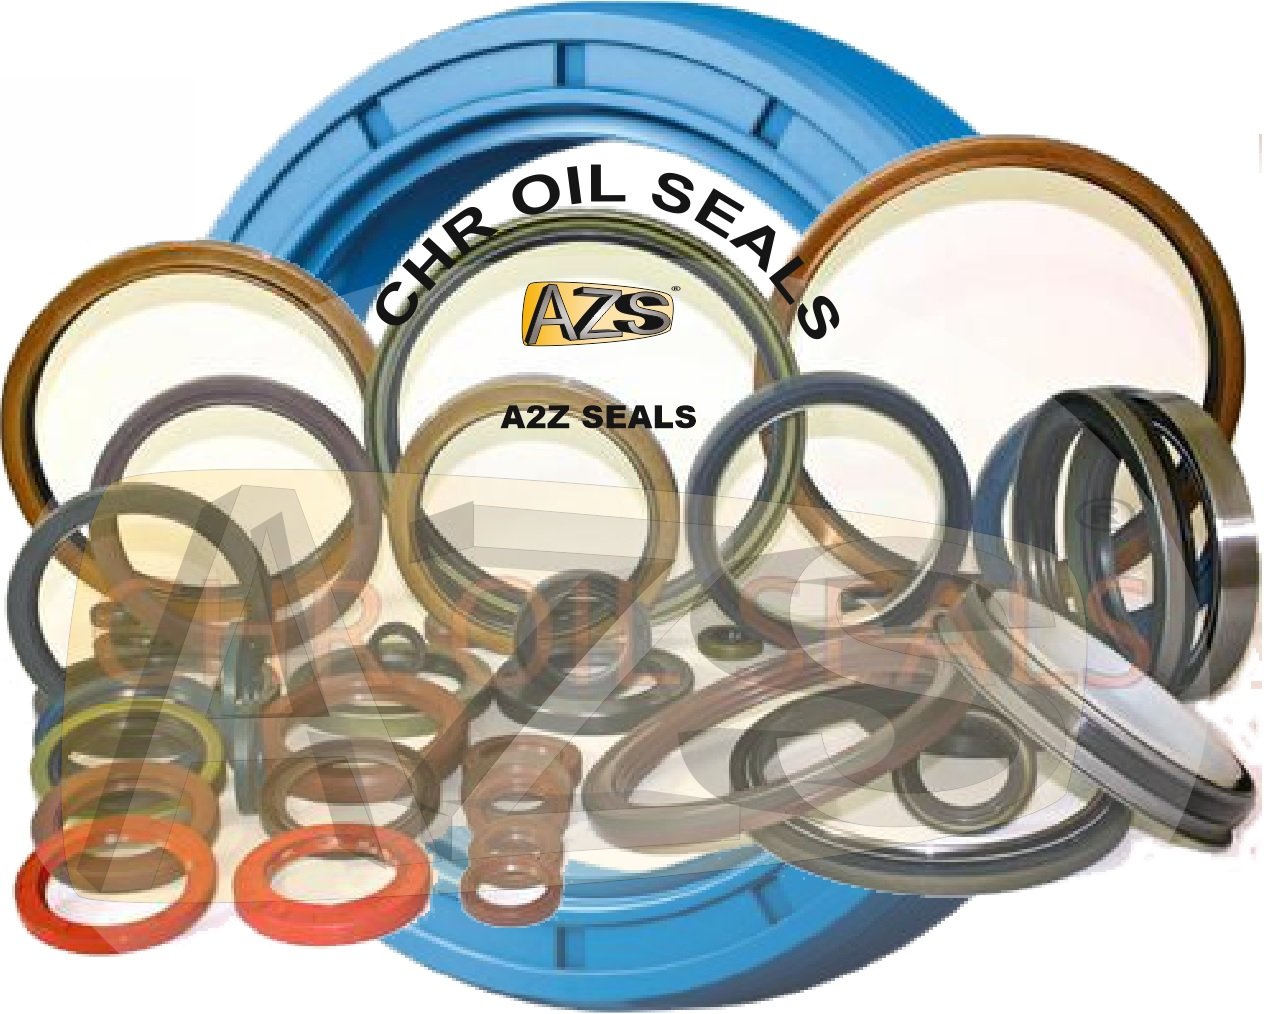 CHR Oil Seal | Quality CHR Oil Seal - Get Yours Now at A2Z Seals!